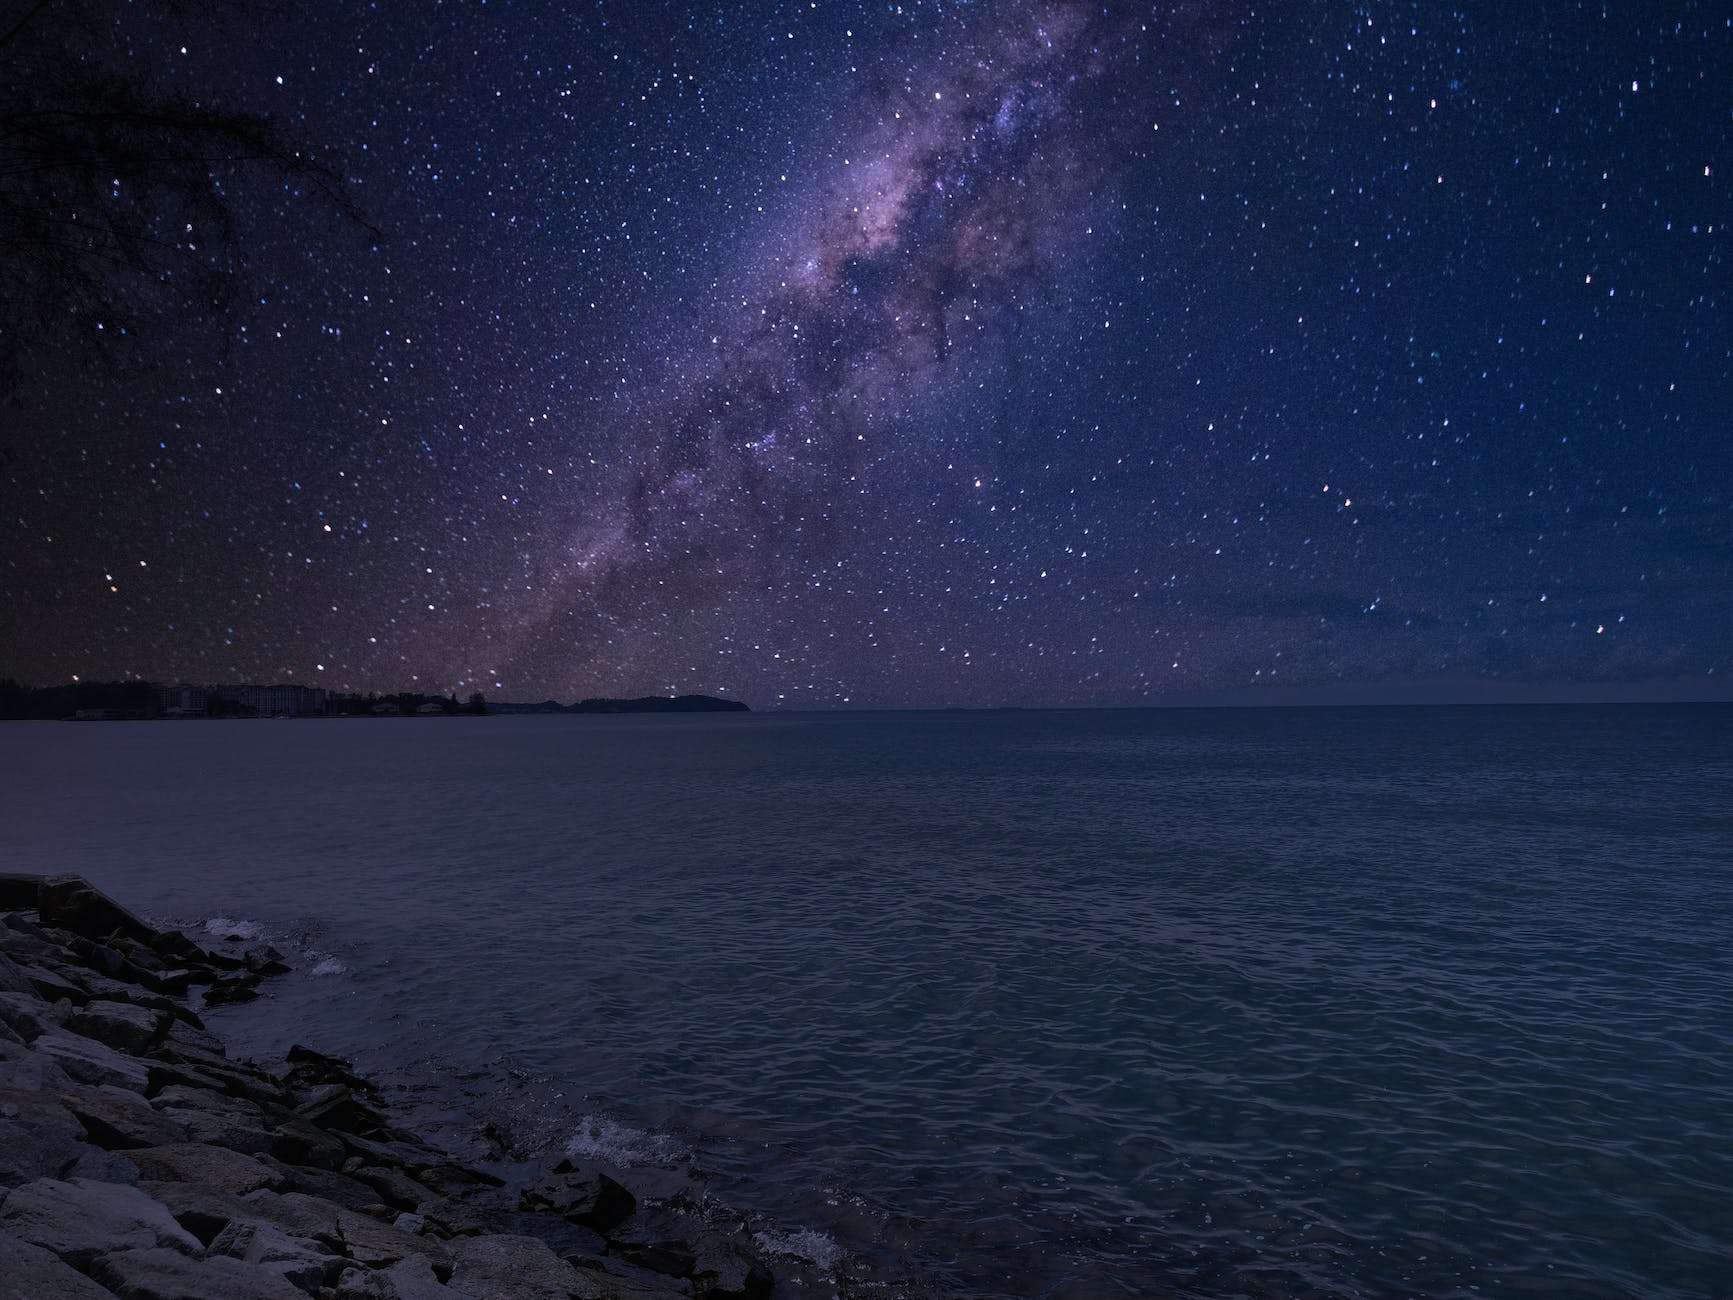 amazing starry sky with milky way galaxy over sea at night